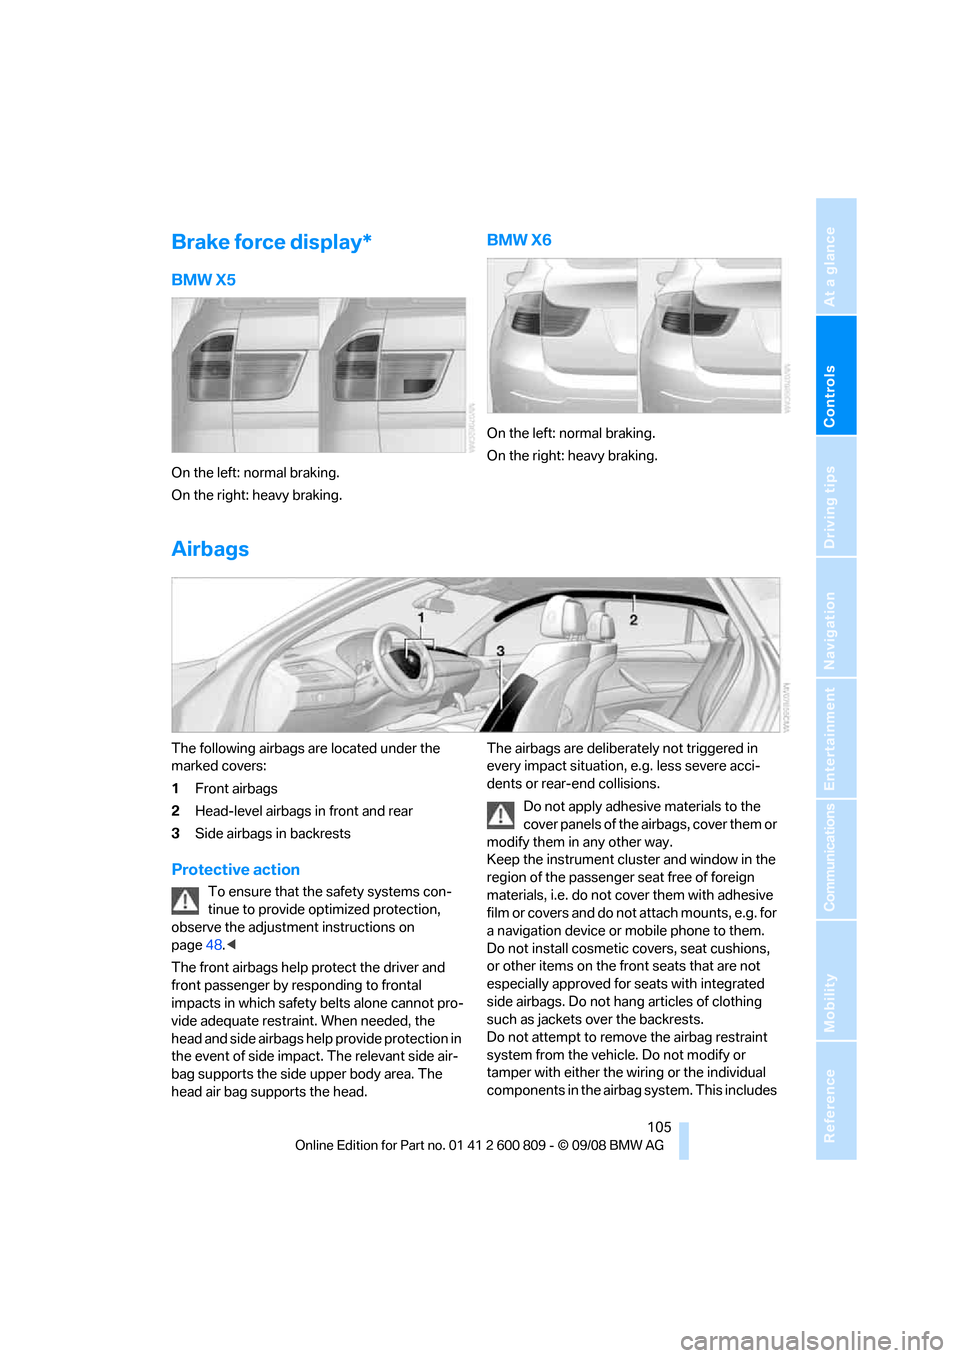 BMW X6 XDRIVE 2009 E71 Owners Manual Controls
 105Reference
At a glance
Driving tips
Communications
Navigation
Entertainment
Mobility
Brake force display*
BMW X5
On the left: normal braking.
On the right: heavy braking.
BMW X6
On the lef